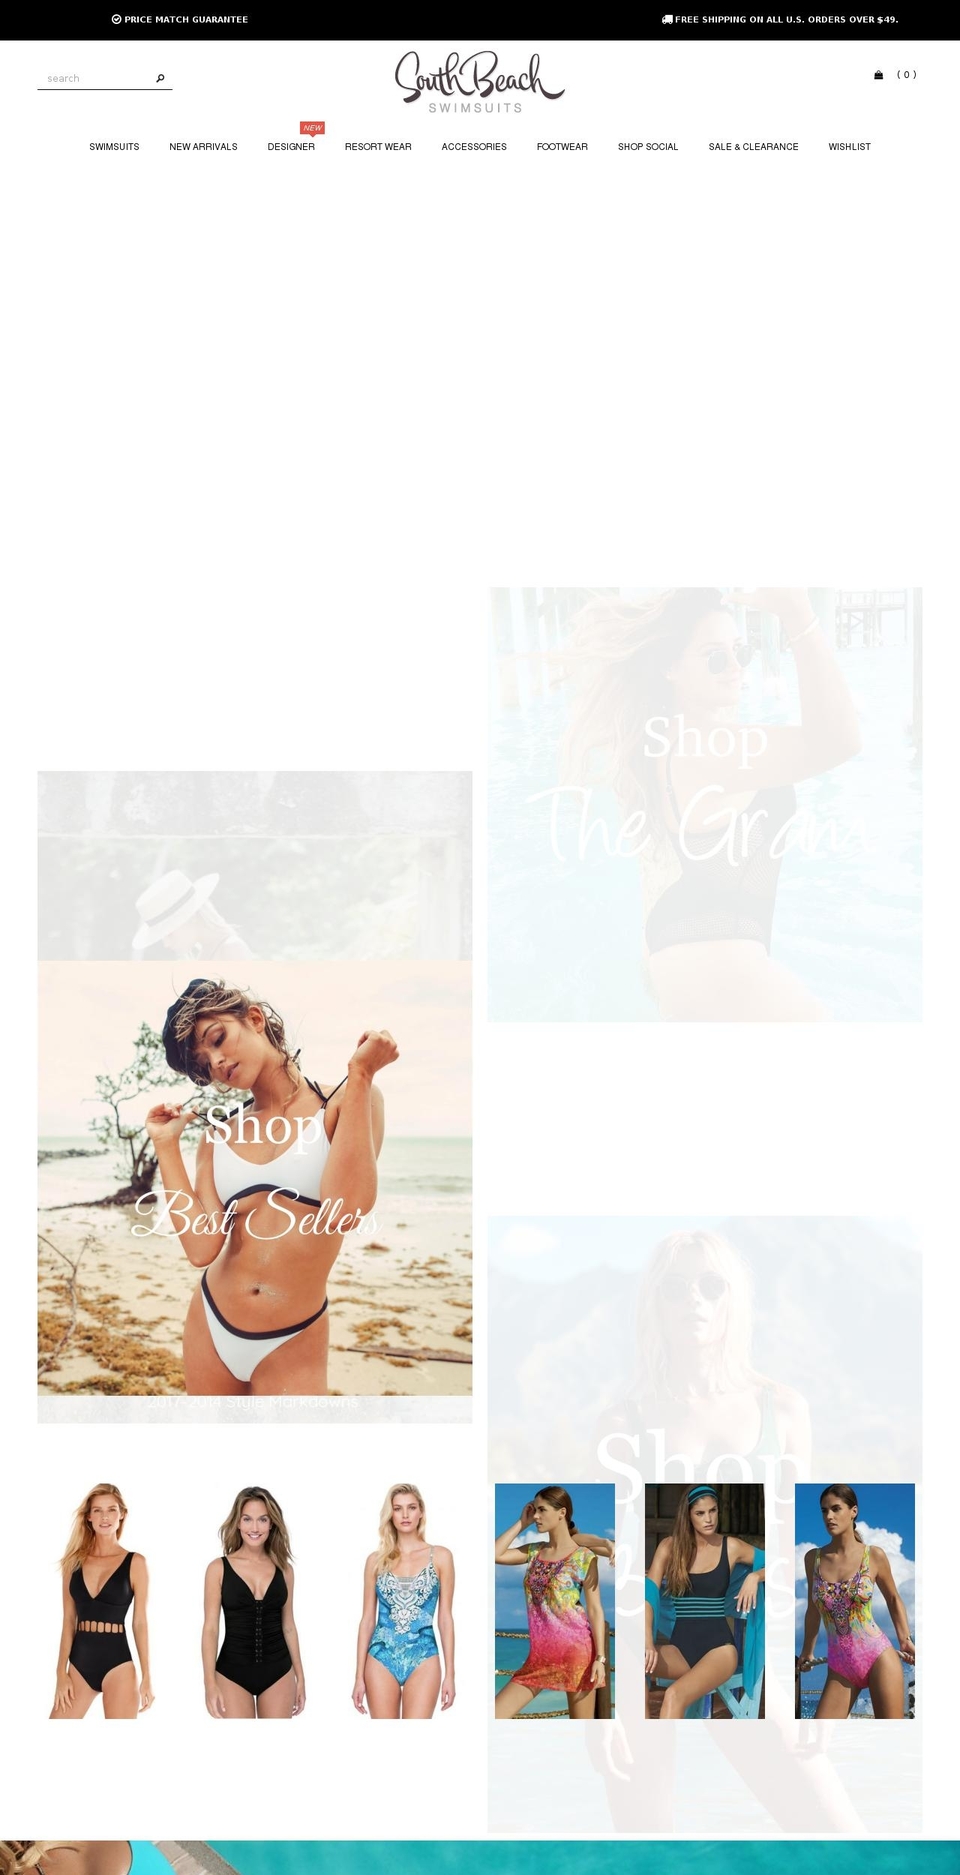 Made With ❤ By Minion Made - Updated Checkout Shopify theme site example instyleswim.com